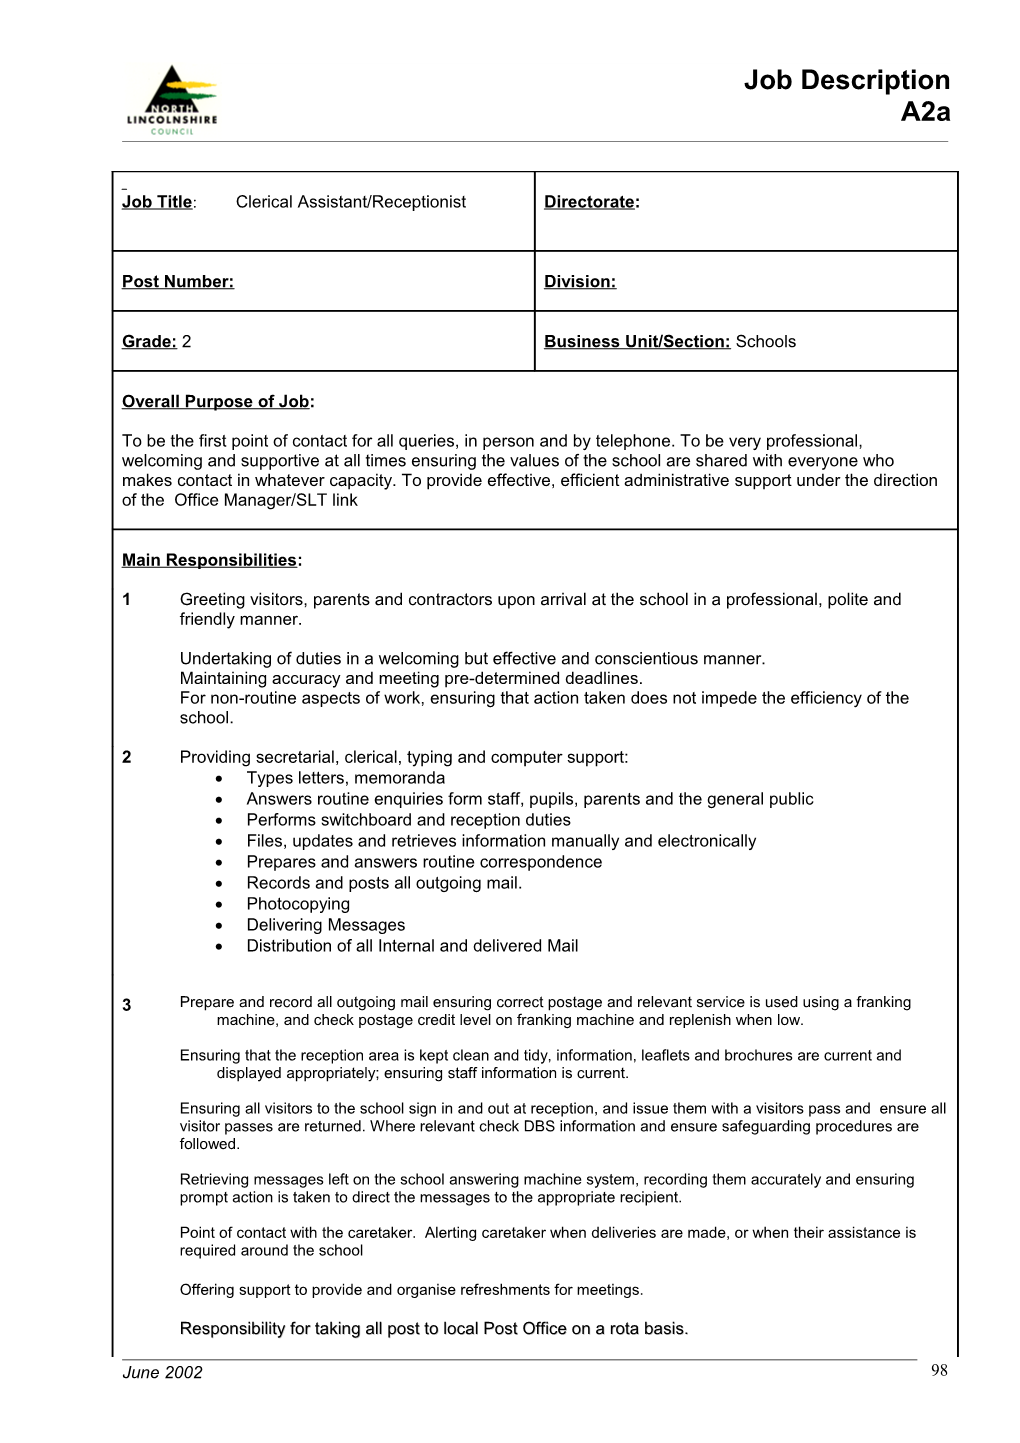 Answers Routine Enquiries Form Staff, Pupils, Parents and the General Public